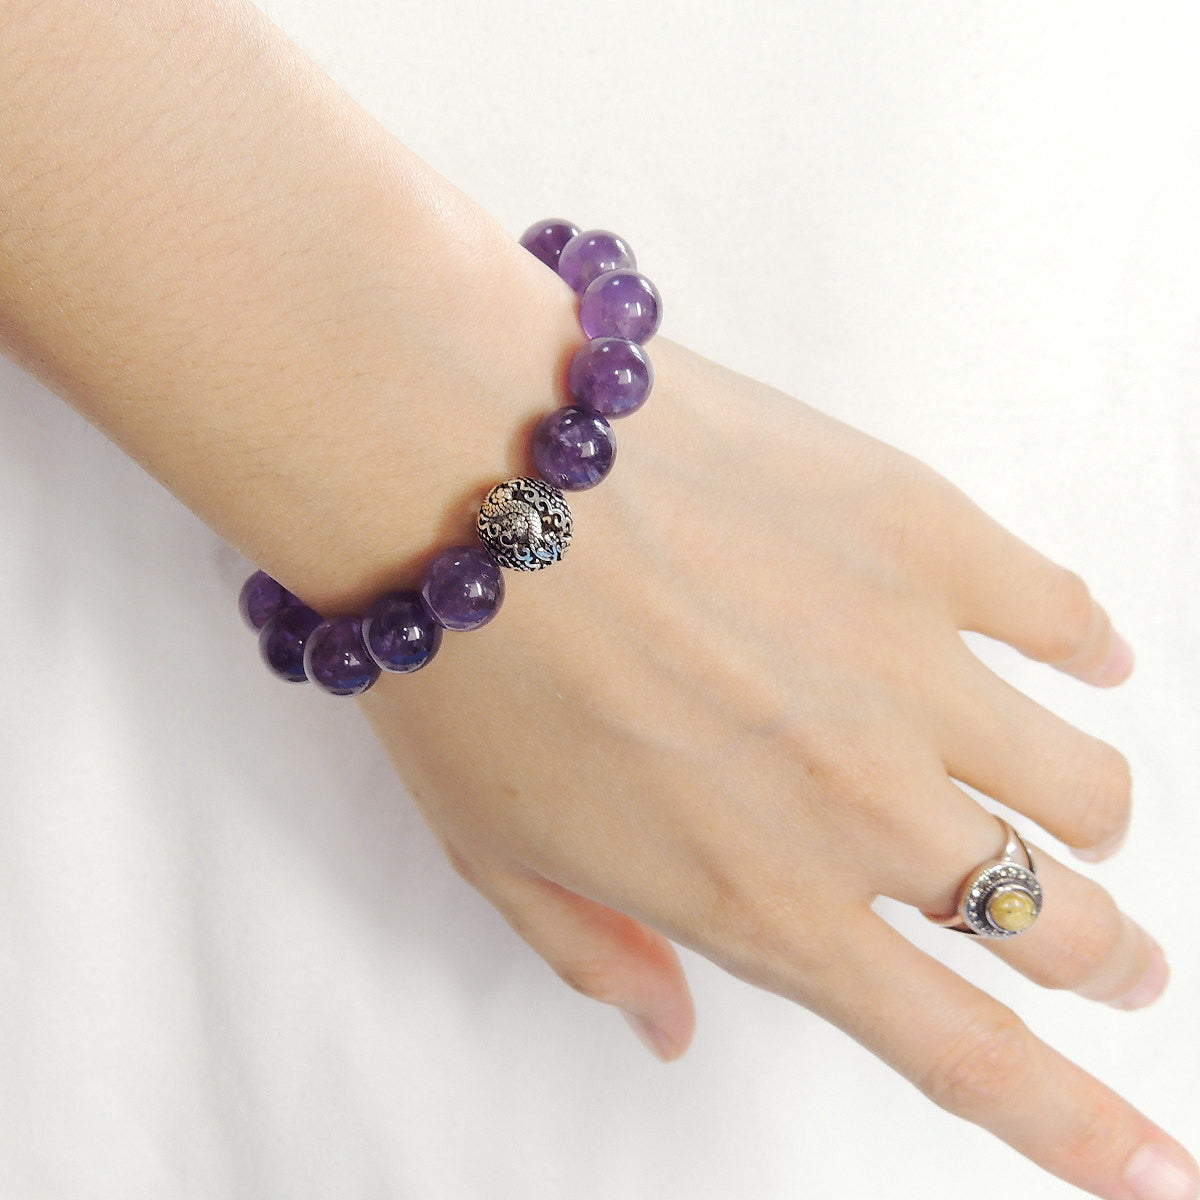 Healing Amethyst Crystal Gemstones, Elegantly Carved Dragon Bead, Handmade adjustable bracelet, Symbol of protection, courage, tranquility, strength, love, spirituality, Gemstone jewelry for All Genders, Prayer, Healing, Yoga, Use with Chakra Meditation to increase your energy flow – durable black cords, adjustable braided drawstring, sterling silver S925, includes FREE Jewelry Bag, Sterling Silver Jewelry Cleaning Cloth